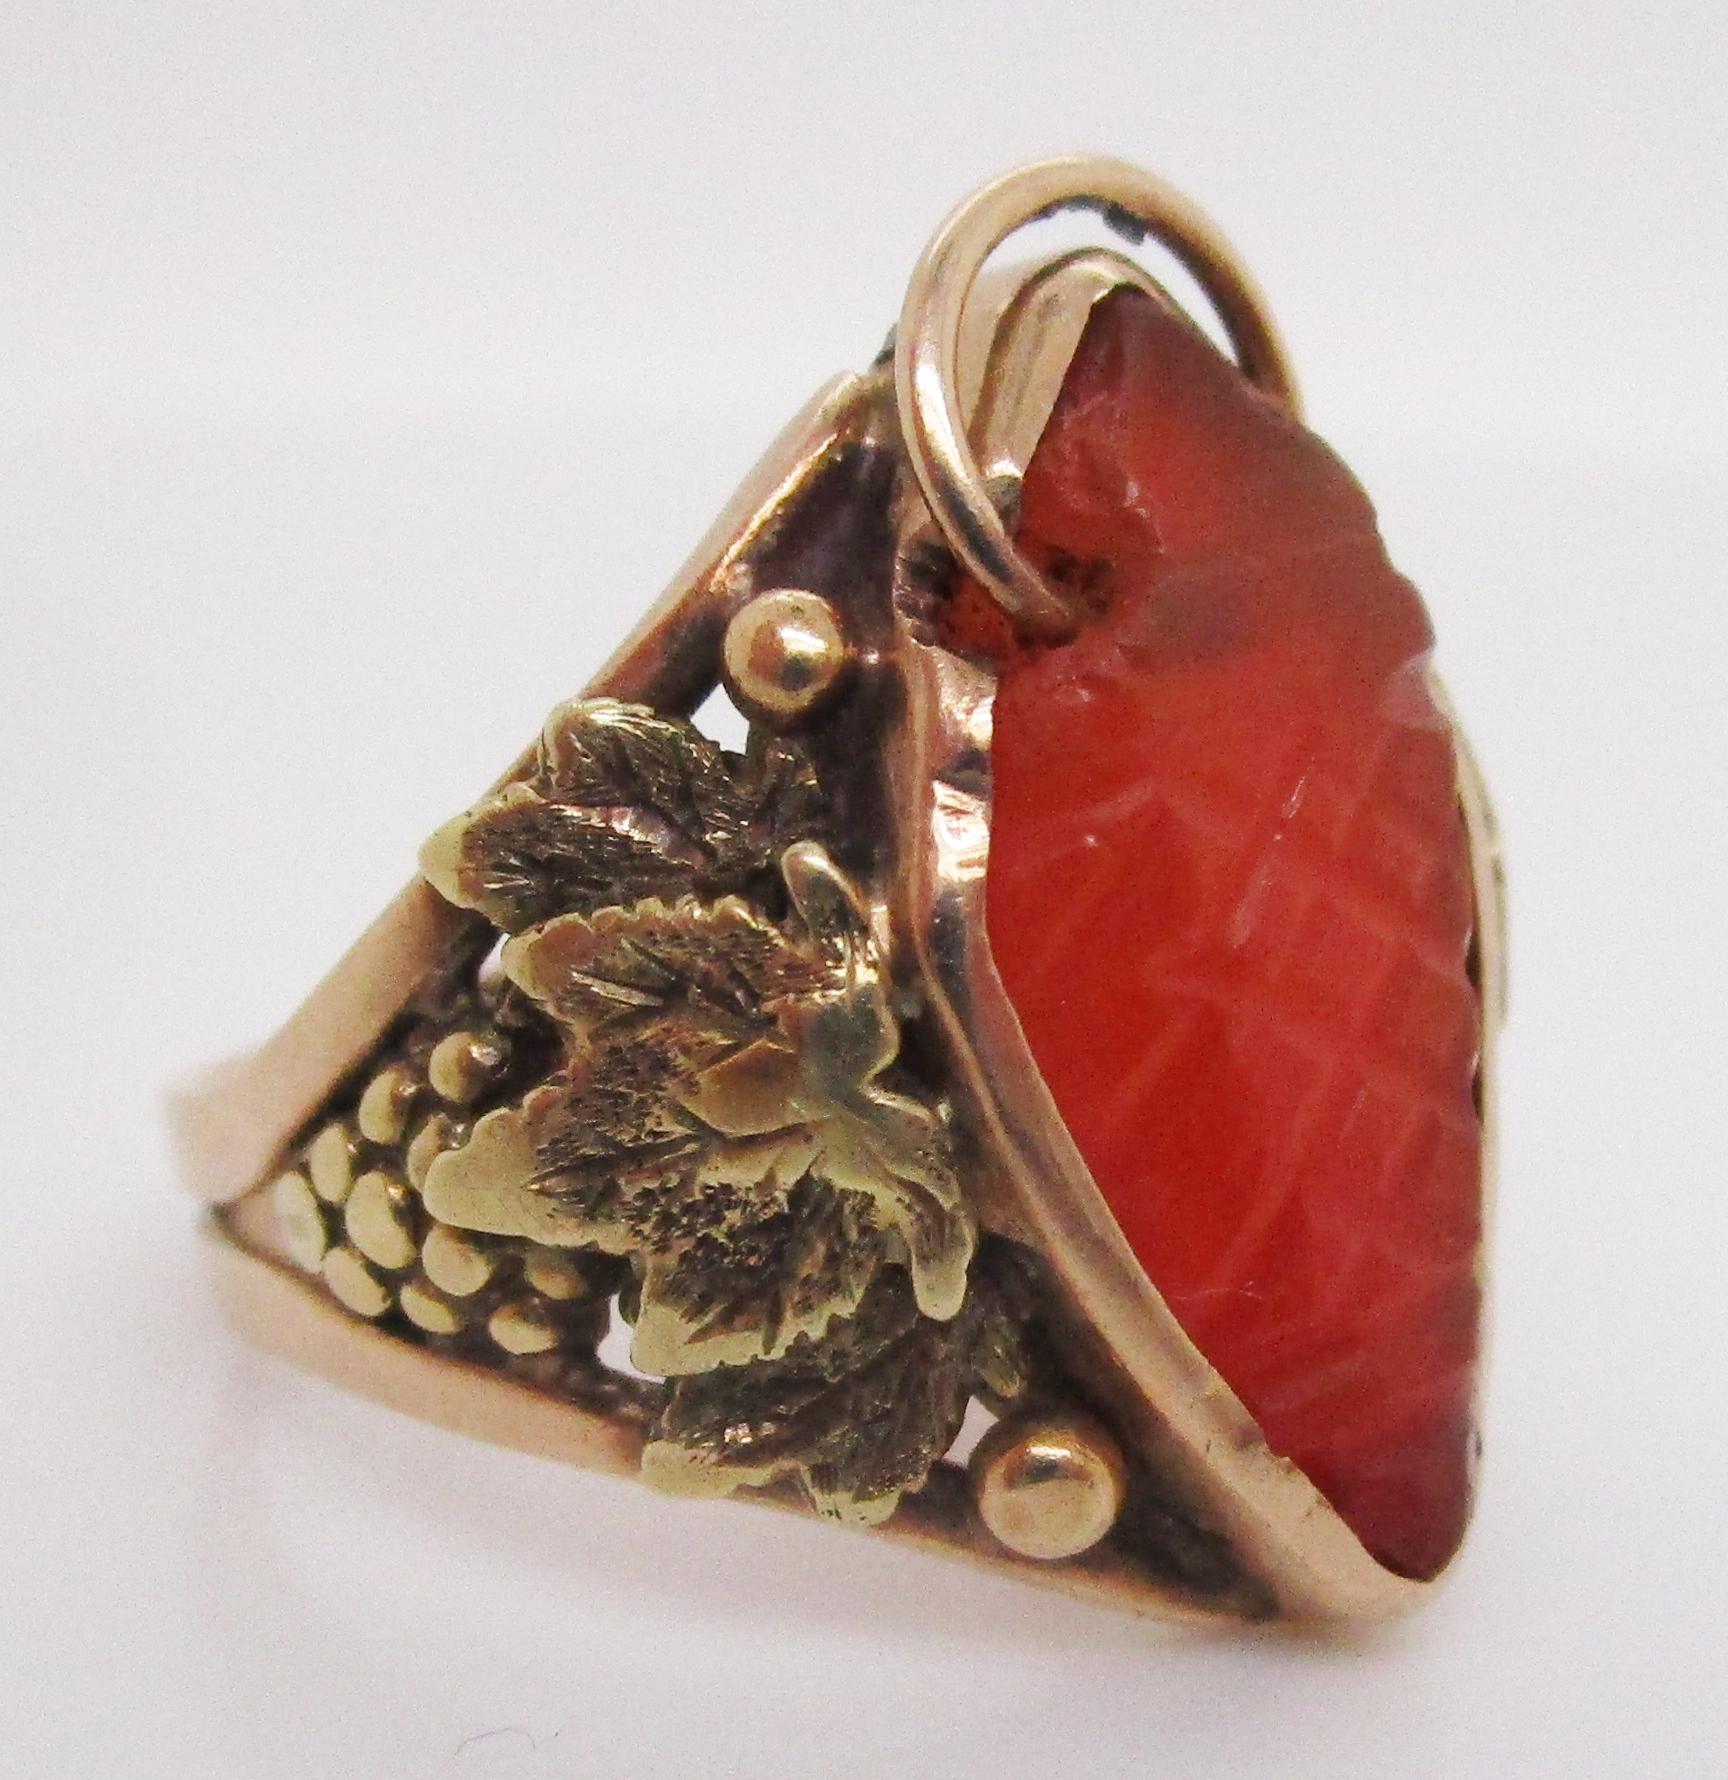 This gorgeous ring exemplifies the best of the Arts and Crafts movement in its spectacular combination of 14k yellow gold, repurposed carved carnelian, and hand-crafted grape and leaf motifs set ever so delicately on the shoulders! The center stone